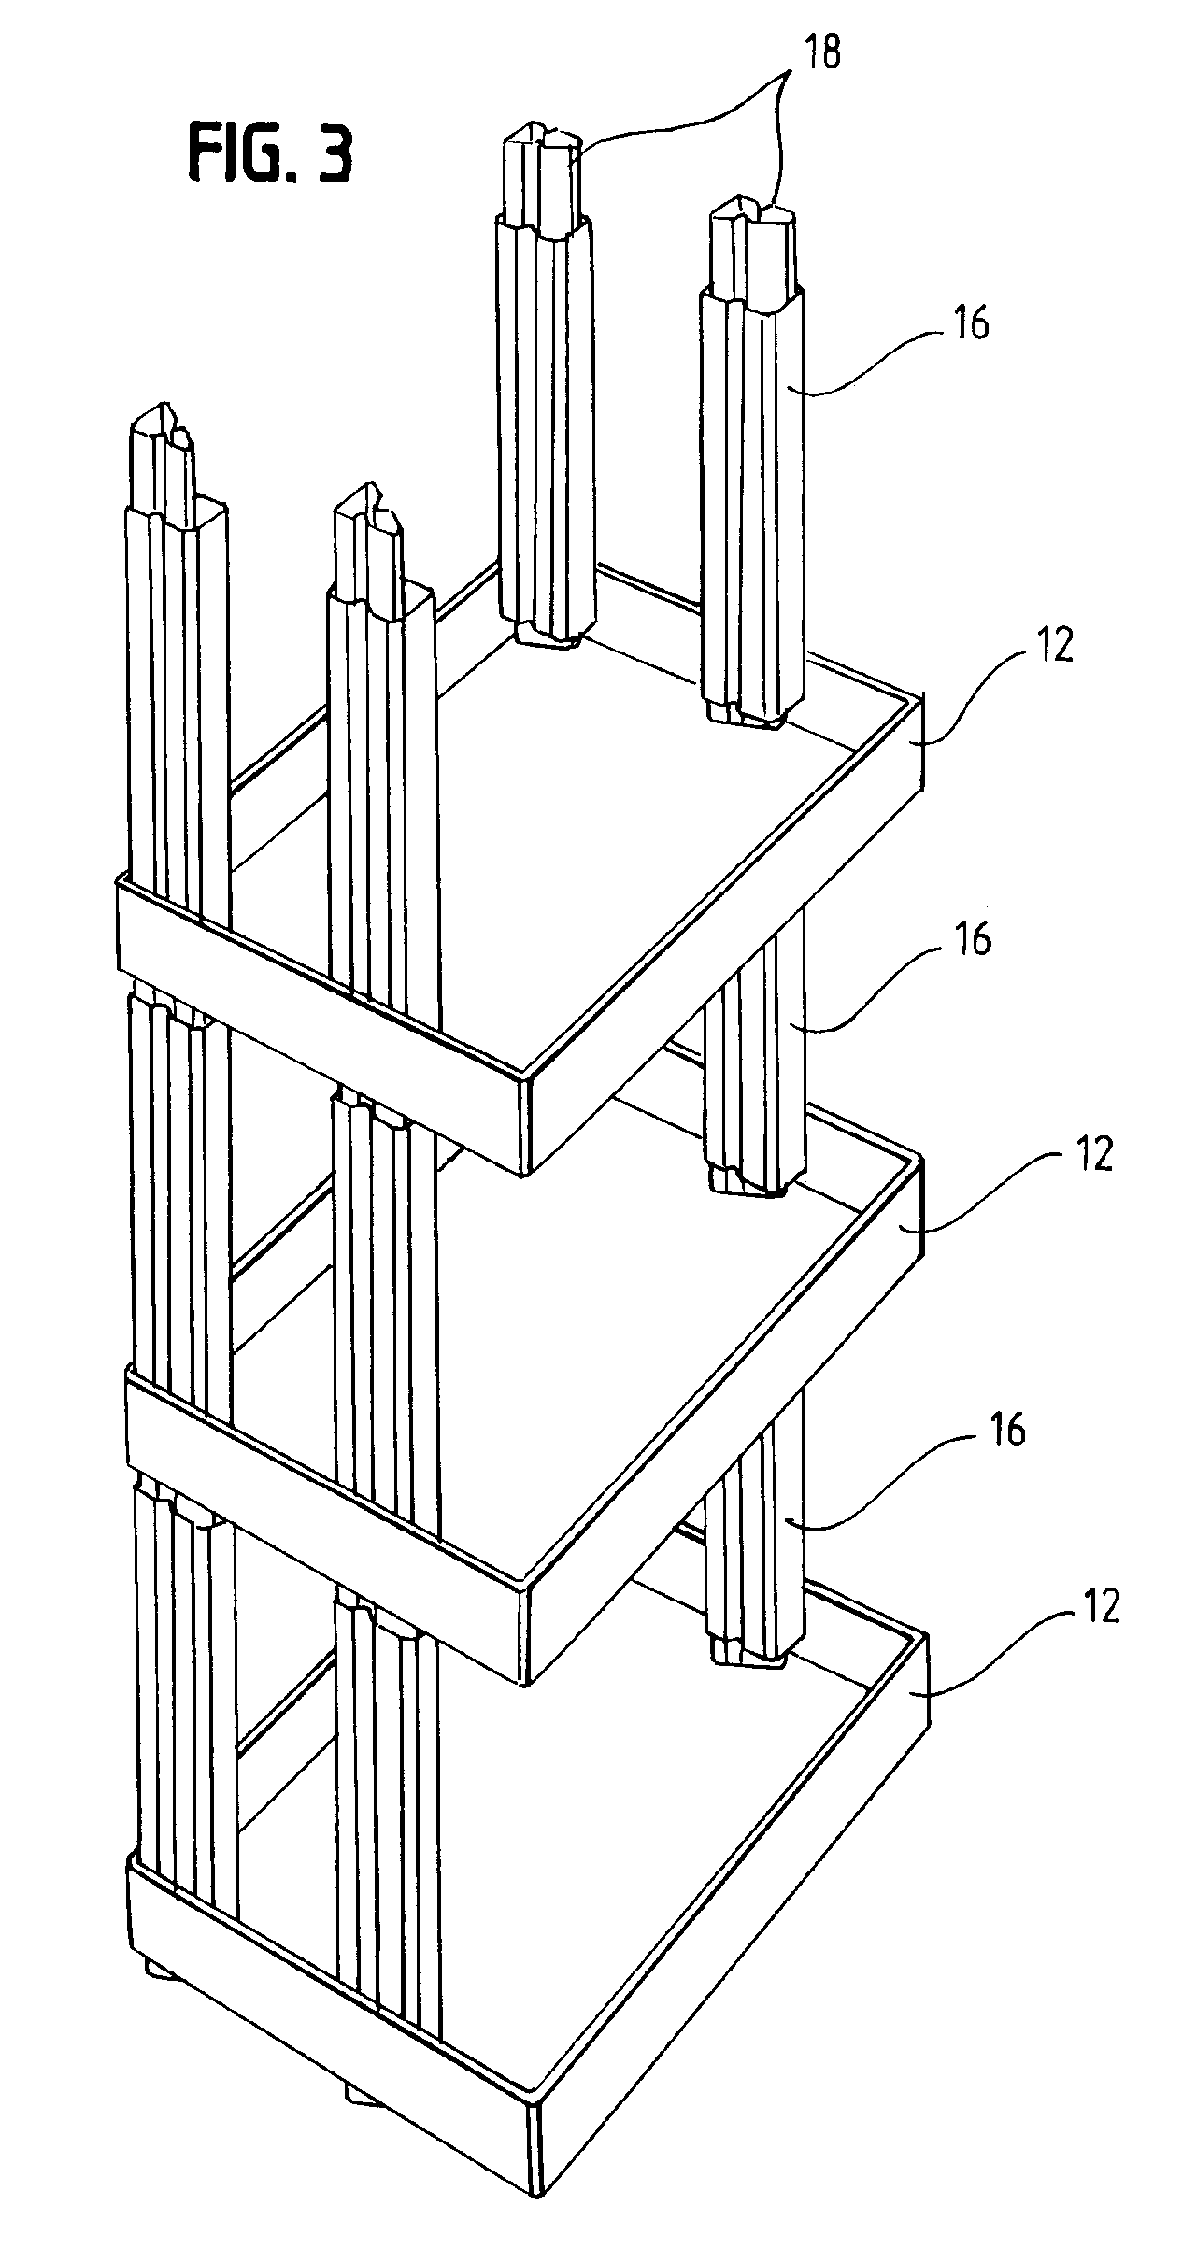 Post in post product packaging and display structure tray system